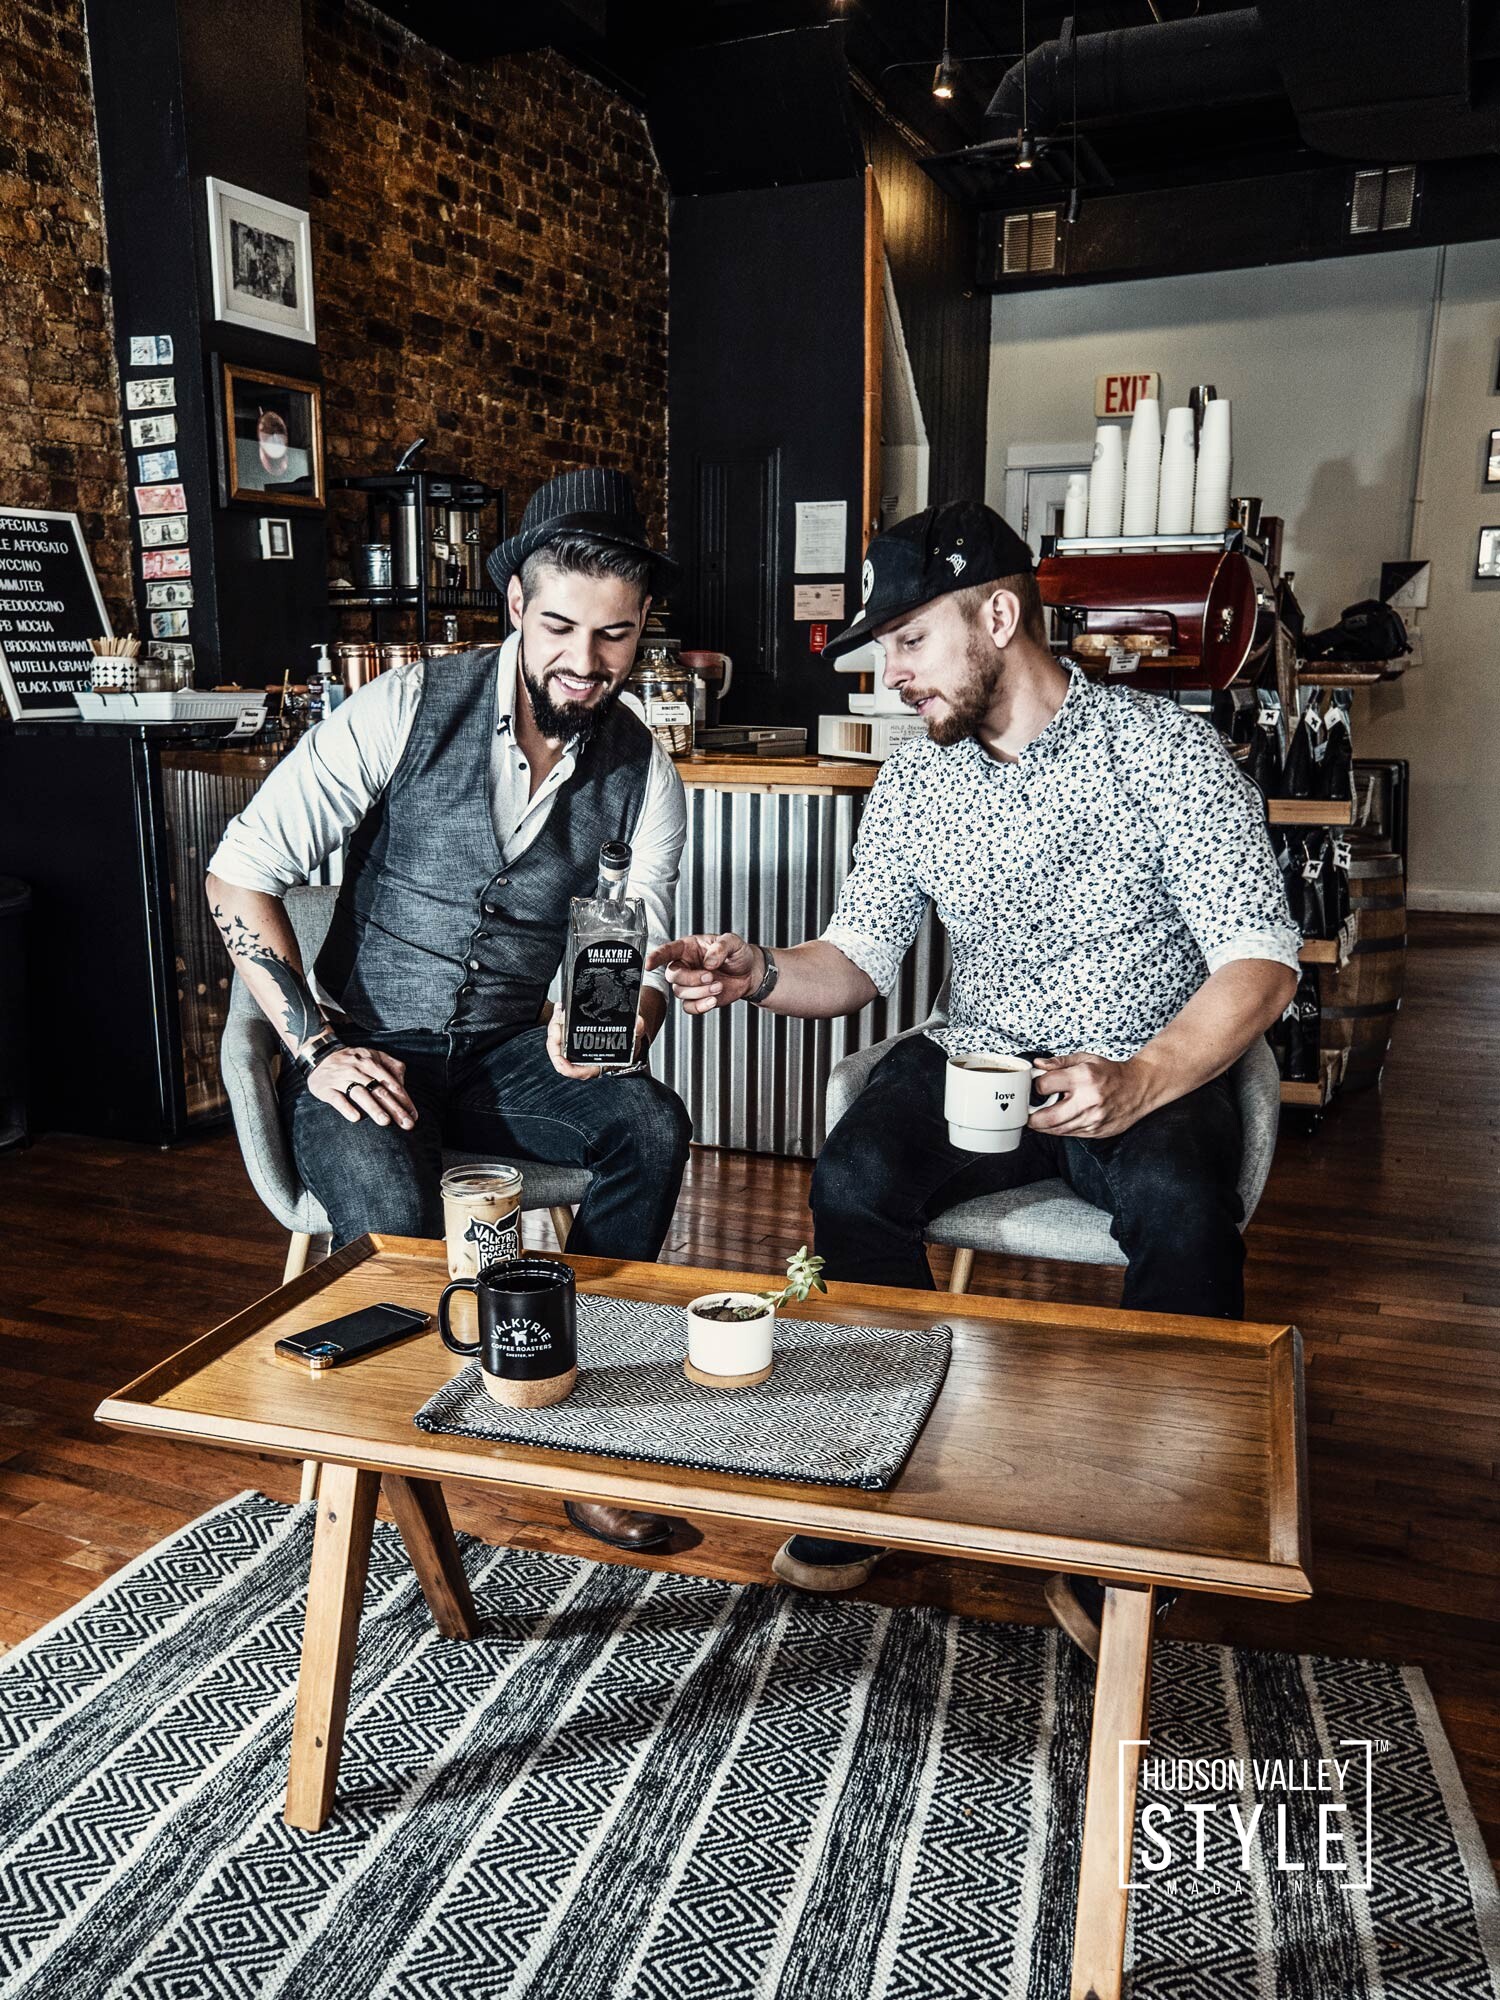 The best coffee-flavored vodka created in Hudson Valley, NY - Exploring Hudson Valley with Dino Alexander (CEO and Principal Broker at AlmaxRealty) – Lifestyle/Brand Photography by Maxwell Alexander, Duncan Avenue Studios